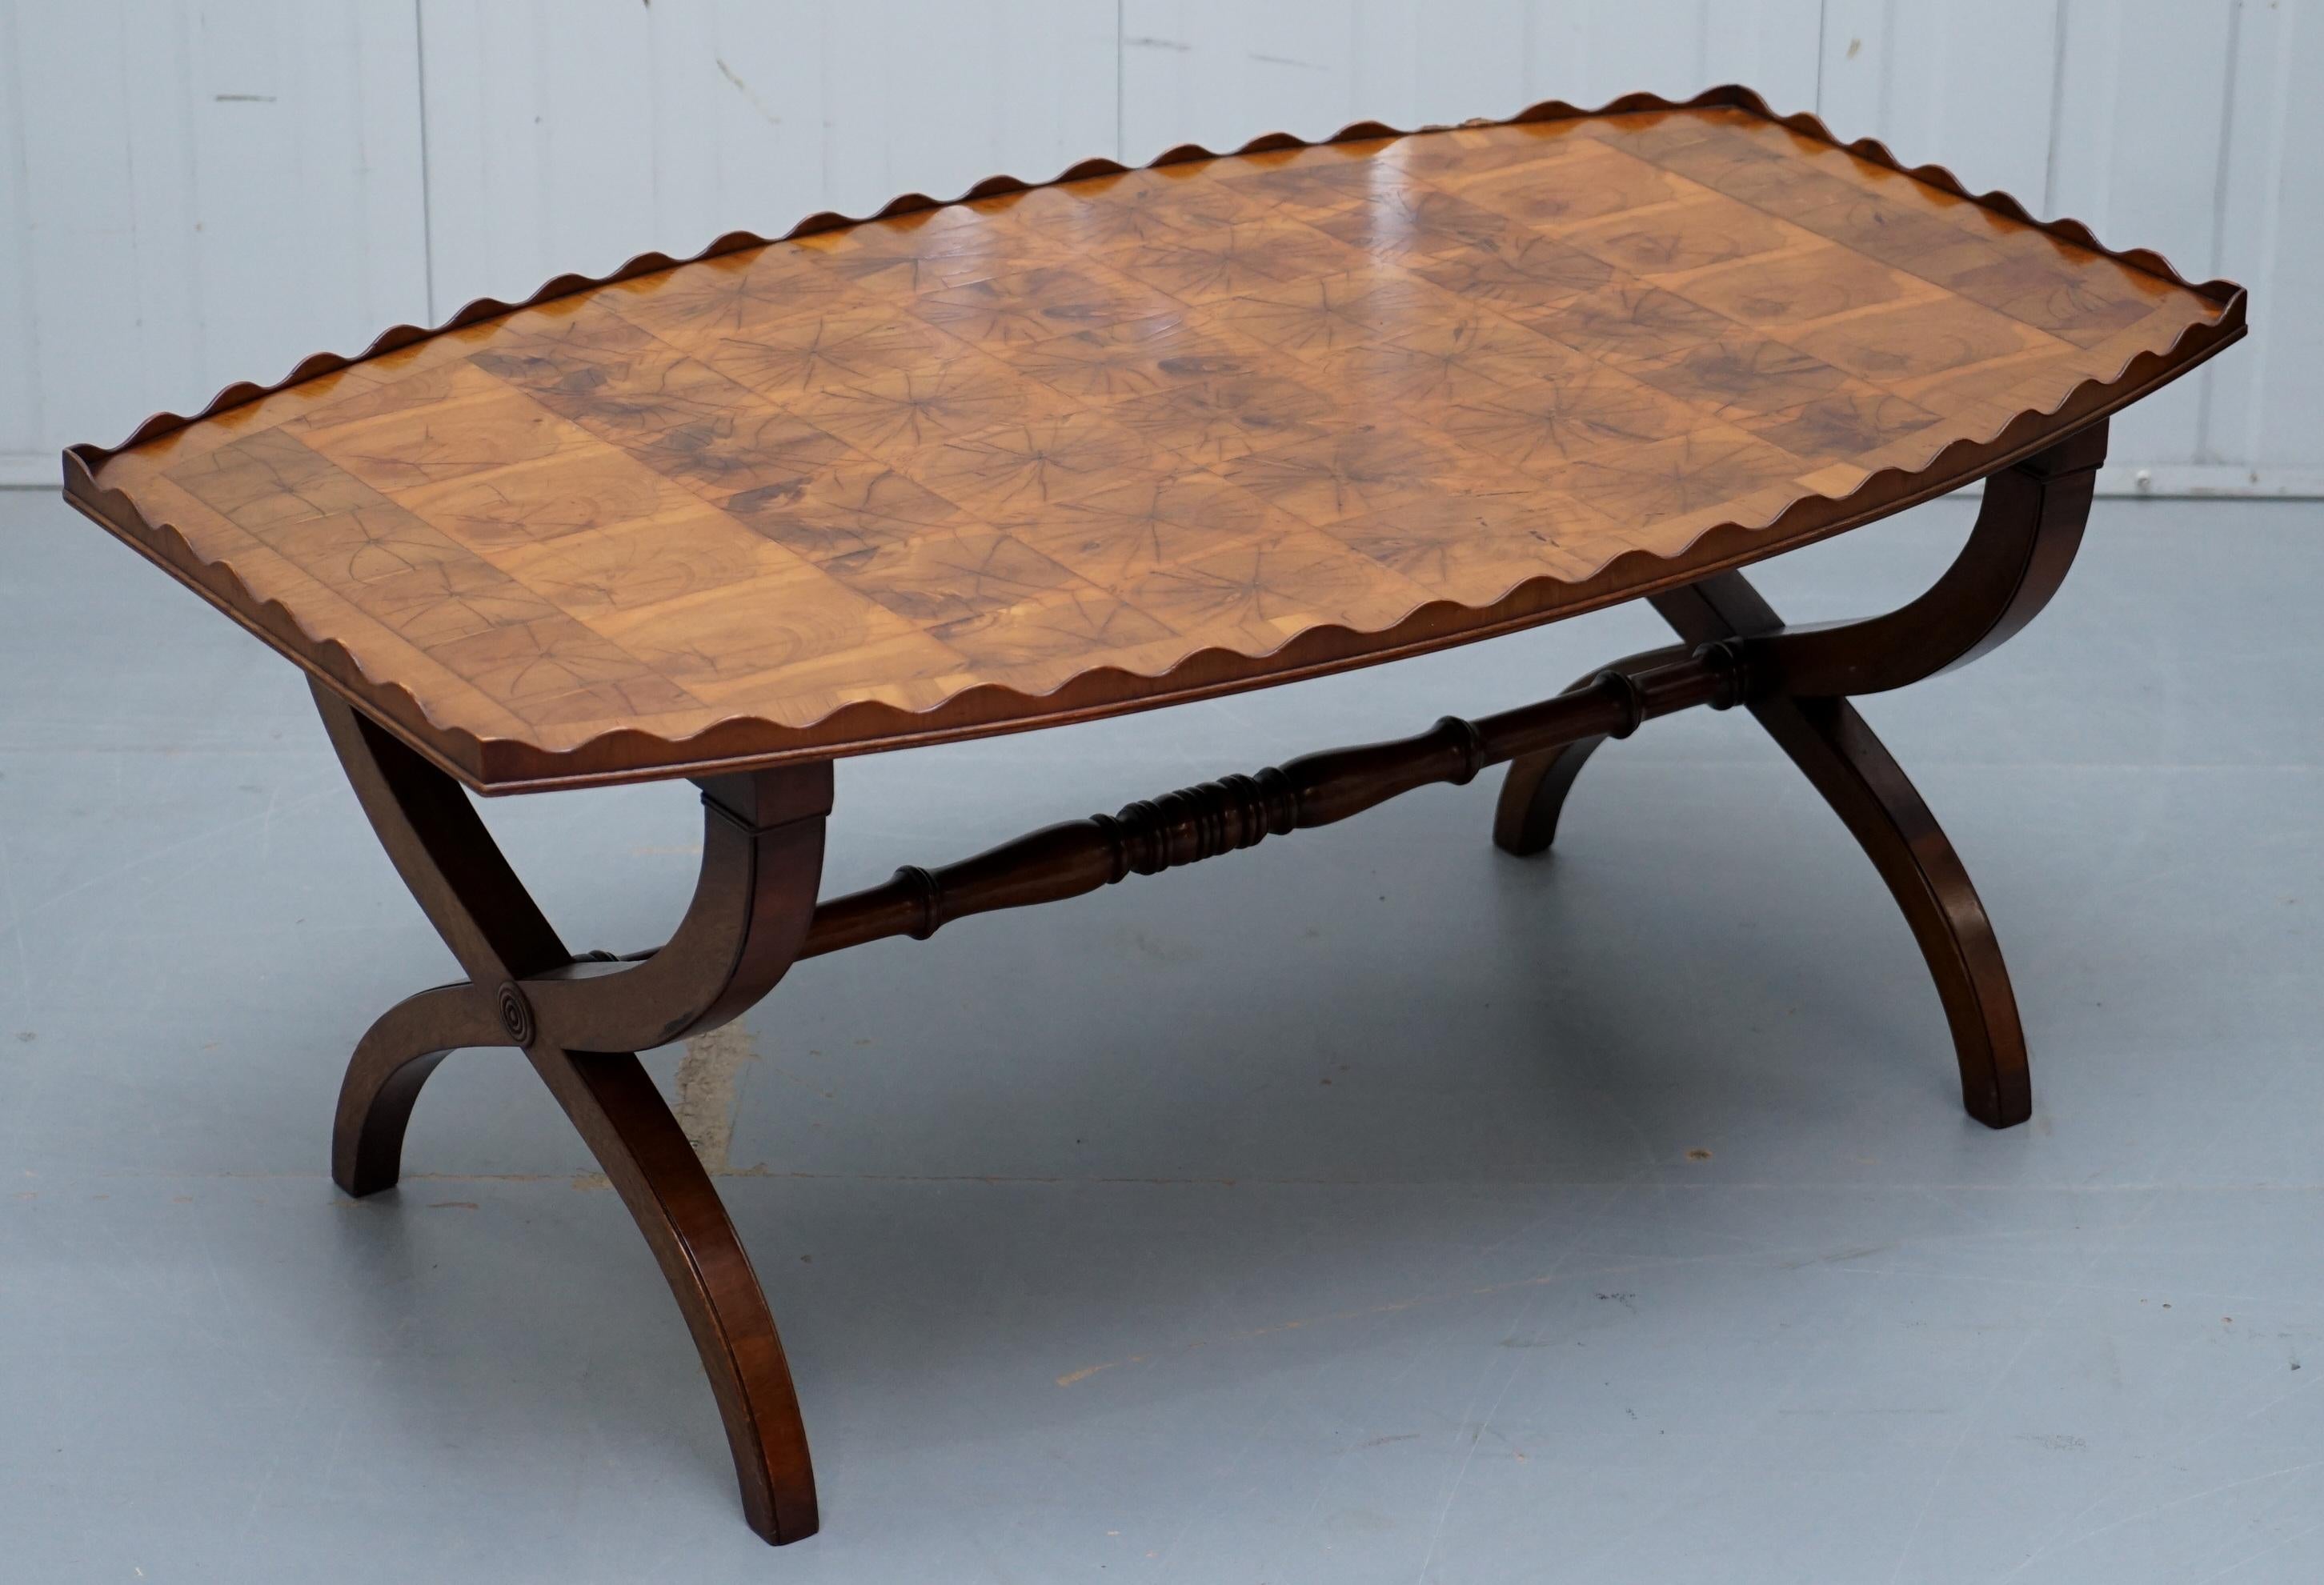 We are delighted to offer for sale this very rare oyster veneered cross band coffee silver tea table

A very ornate piece, the detail is mind-blowing, oyster veneer is some of the rarest around, it is a tour de force of craftsmanship to get it